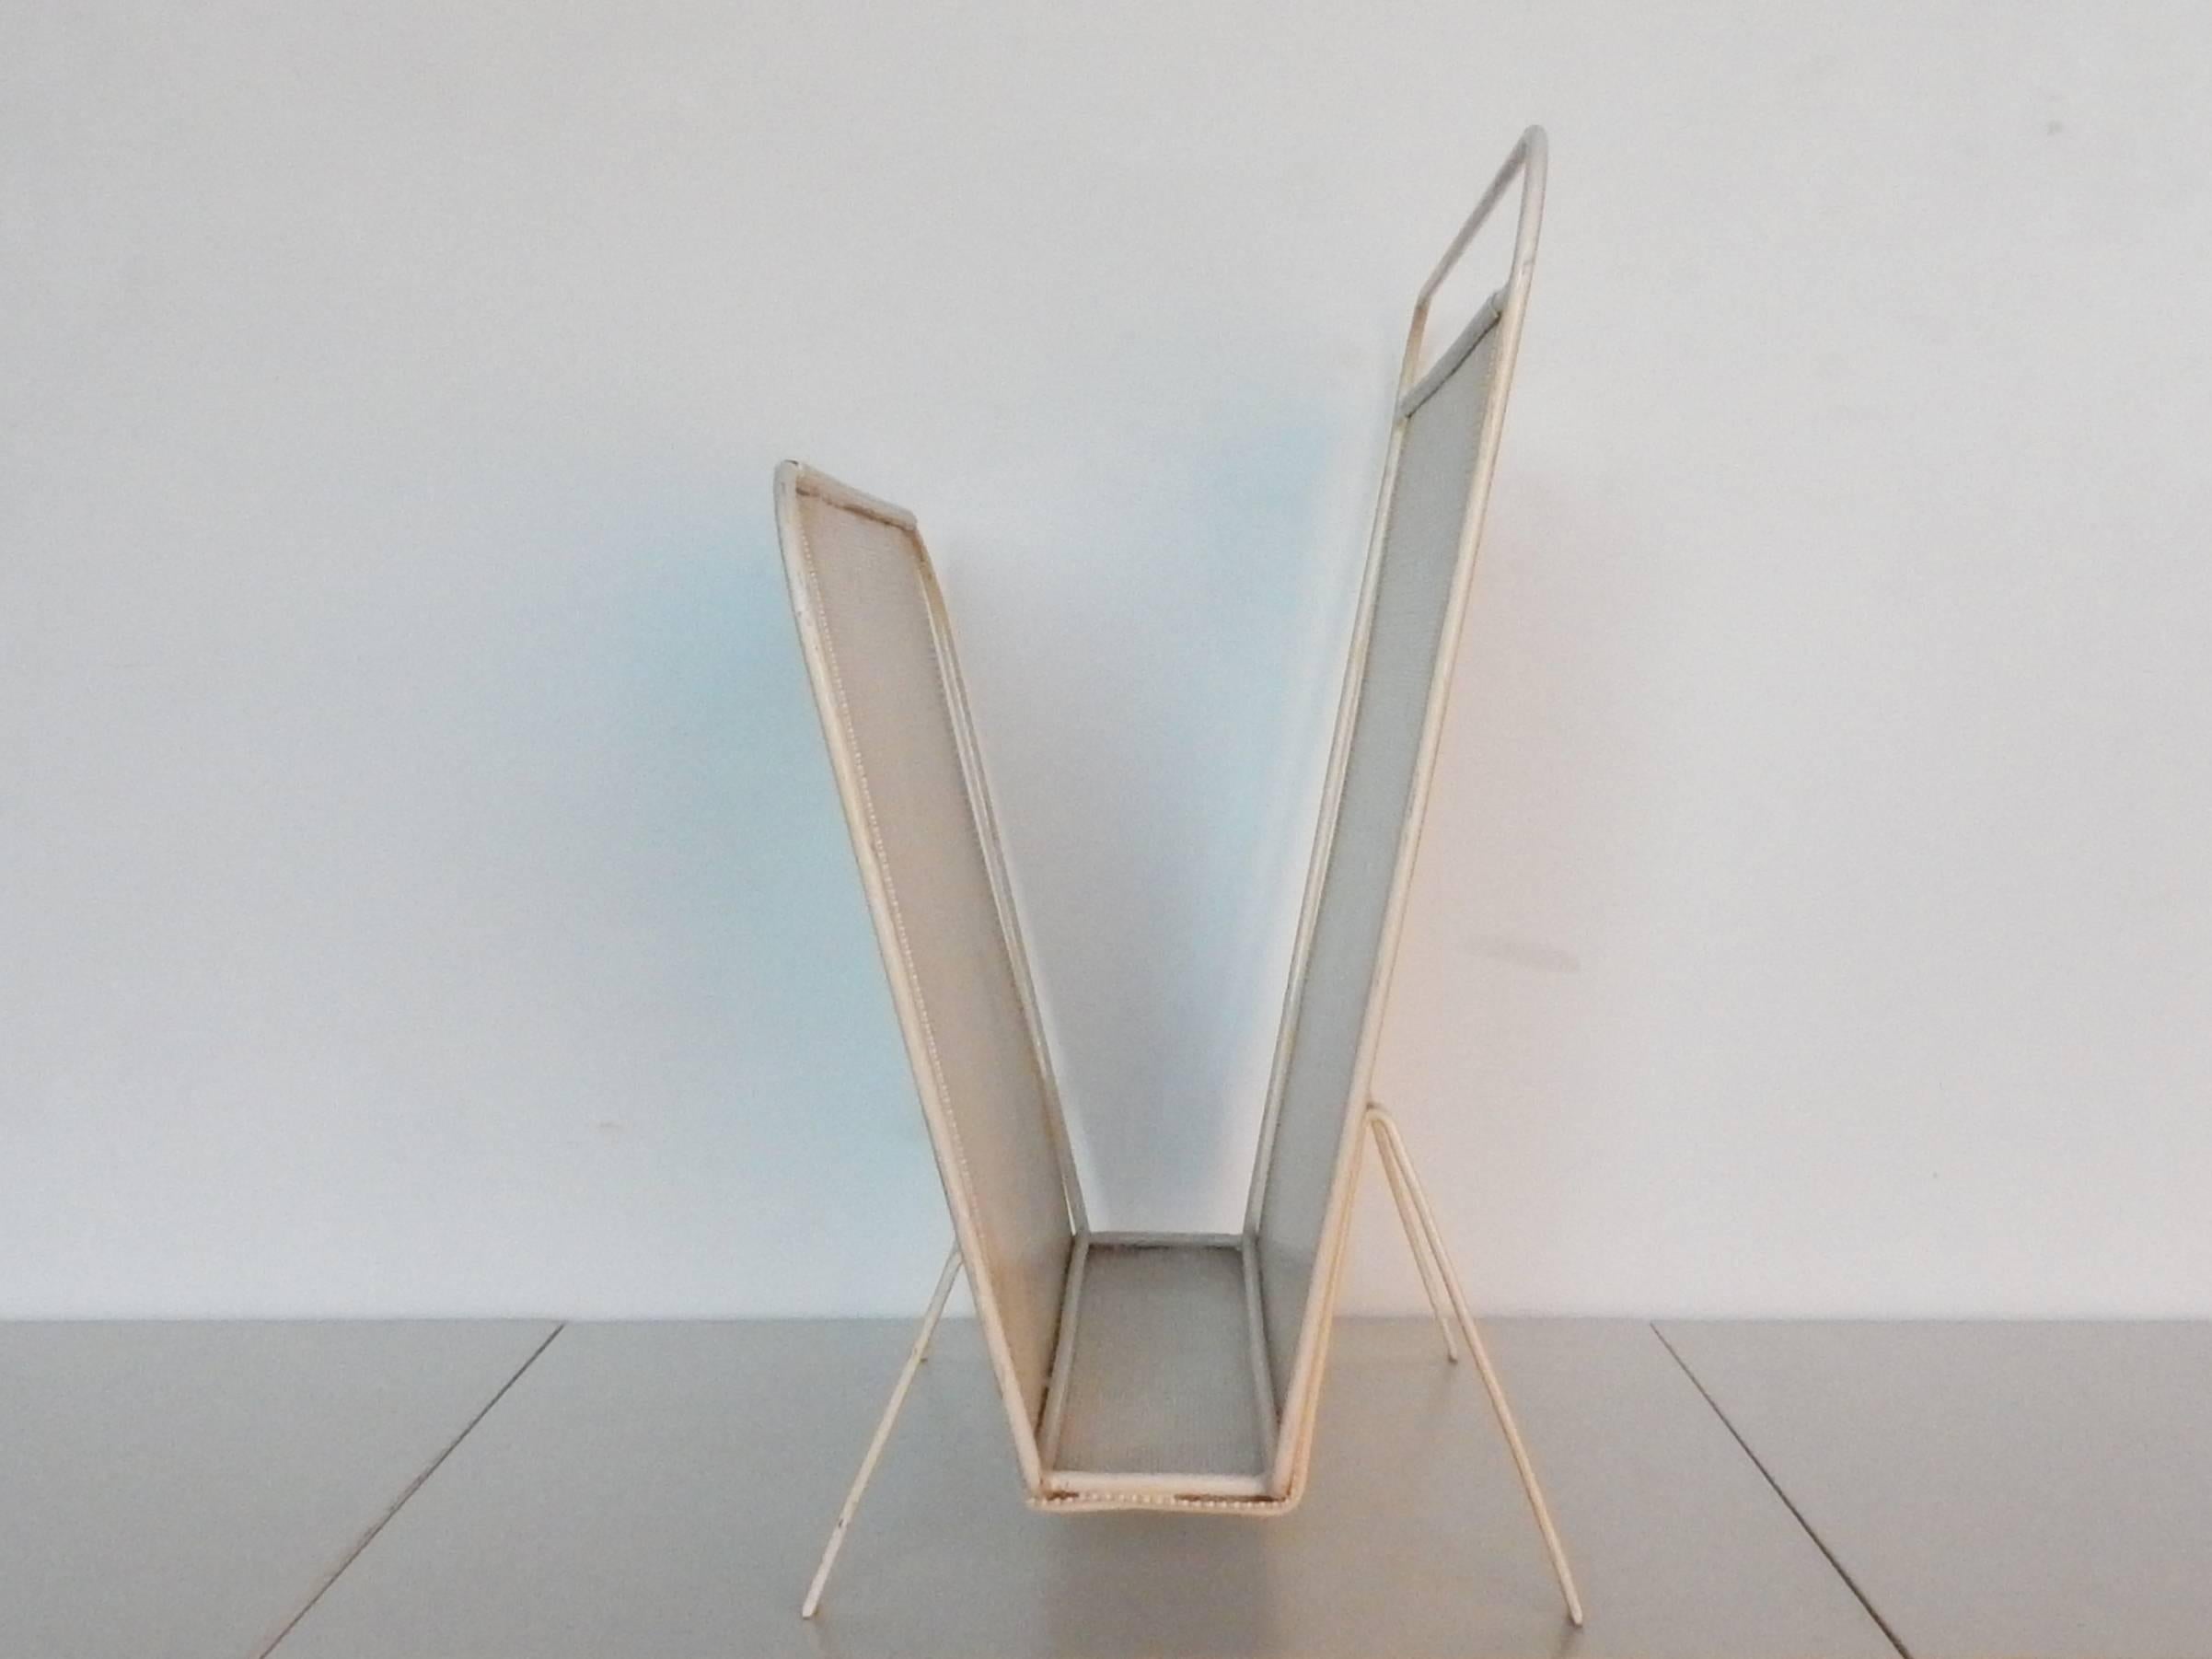 Beautiful magazine rack from mid-1950s by the company of Artimeta from Soest, The Netherlands. This design is often attributed to Mathieu Matégot who designed for Artimeta in this era. In collaboration with Floris Fiedeldij, the head designer at